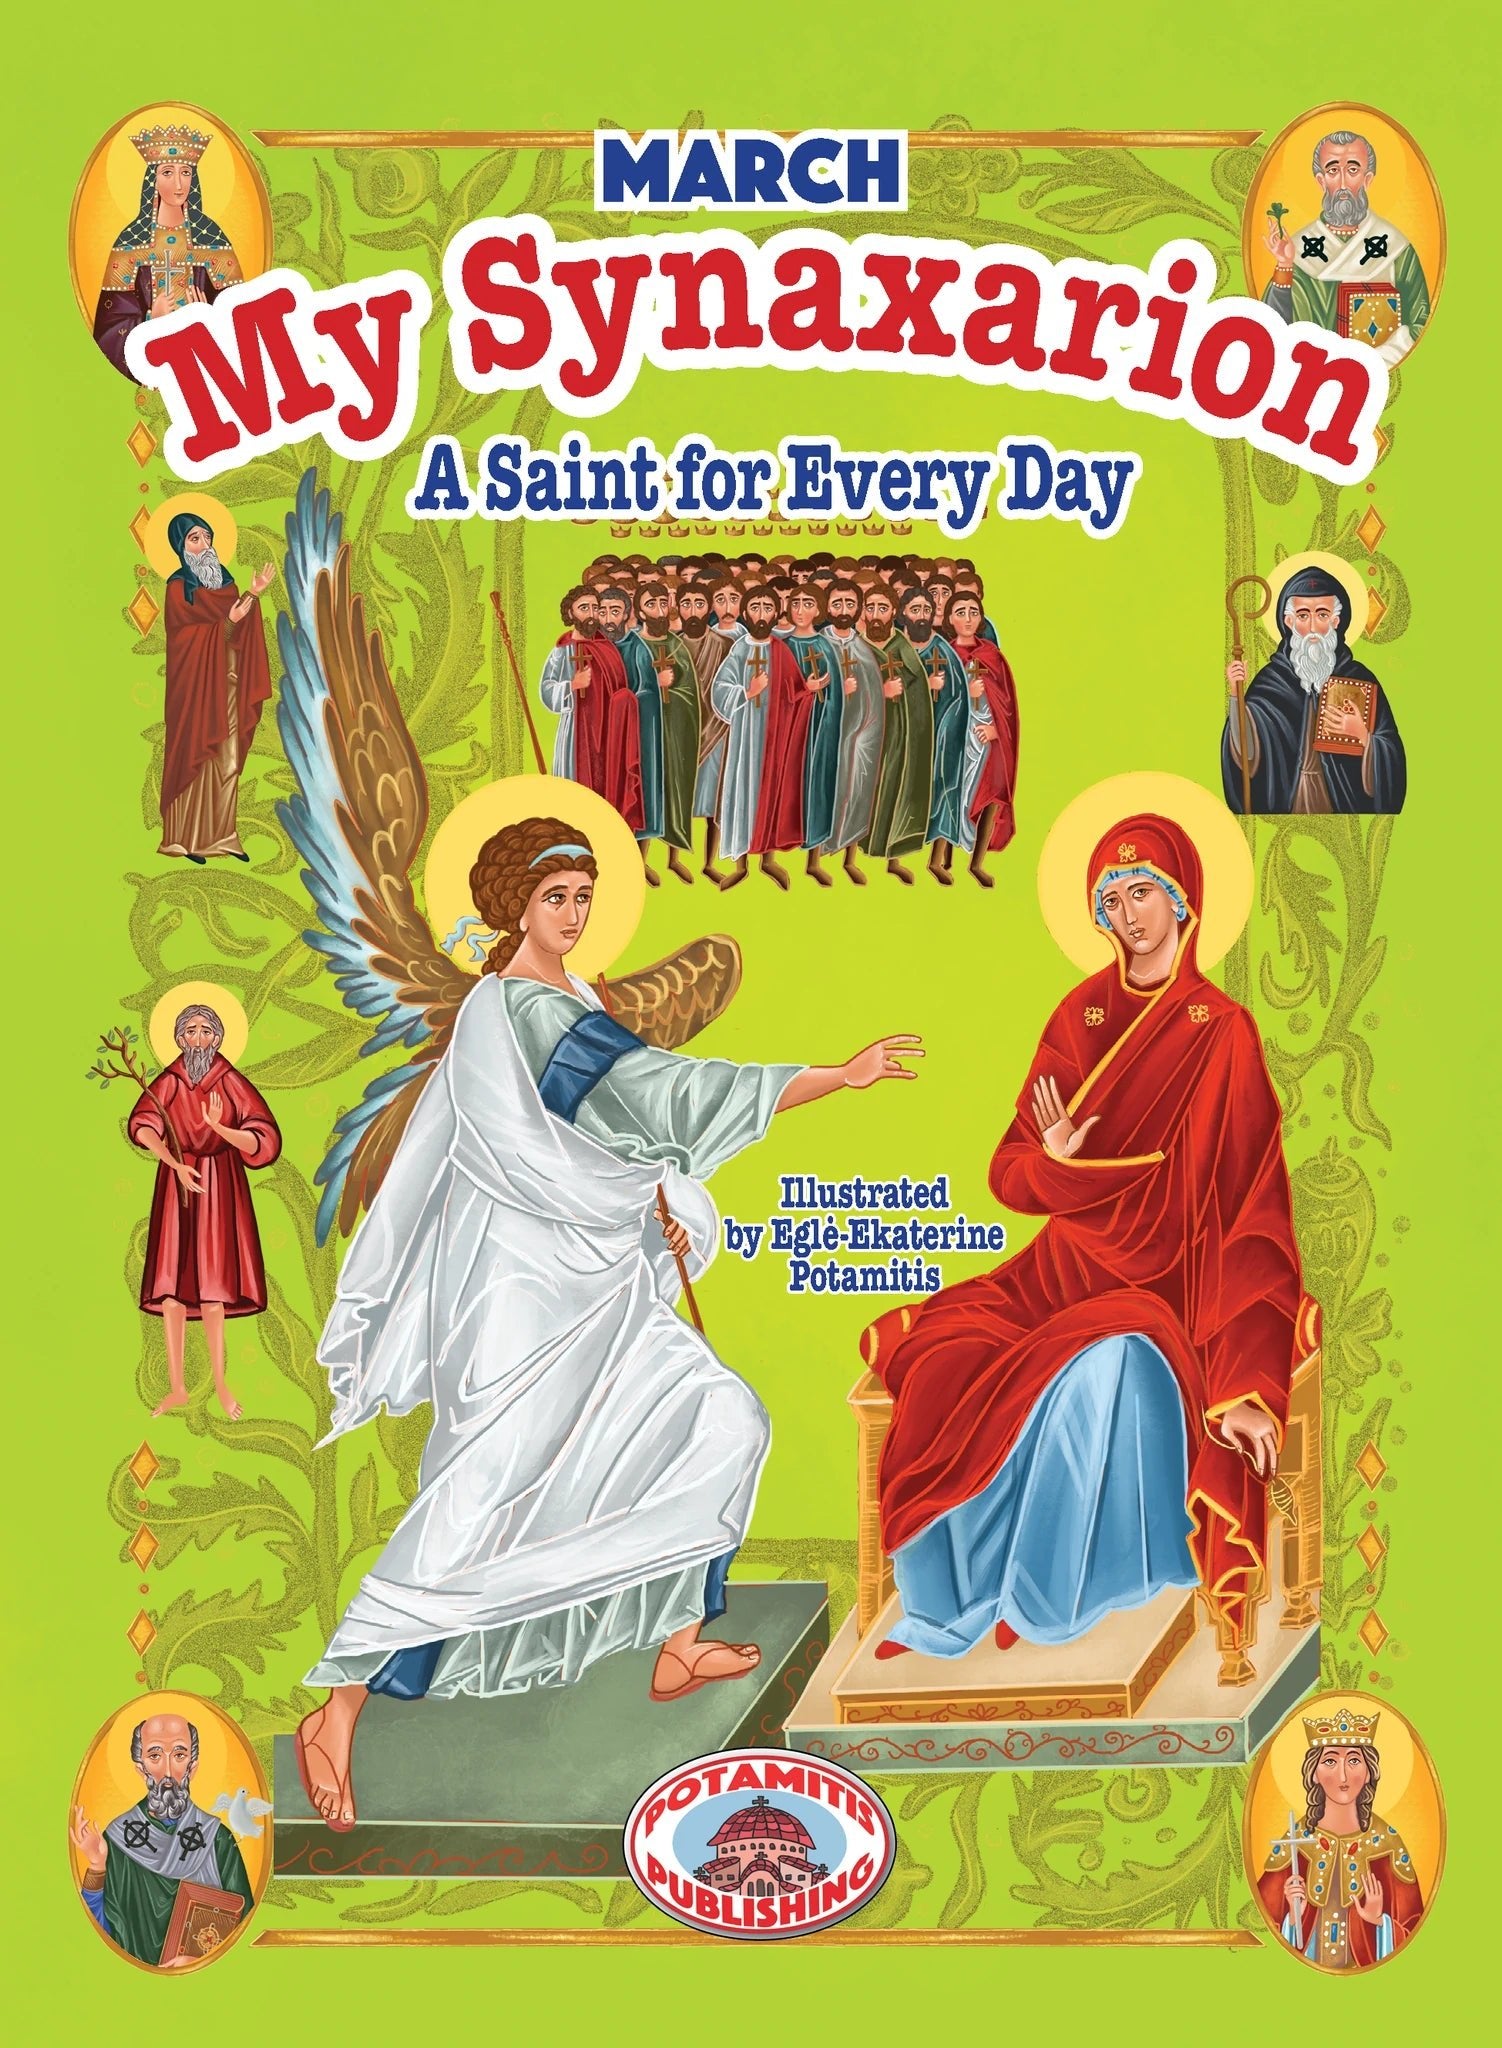 Copy of My Synaxarion - A Saint for Every Day [March] - Holy Cross Monastery